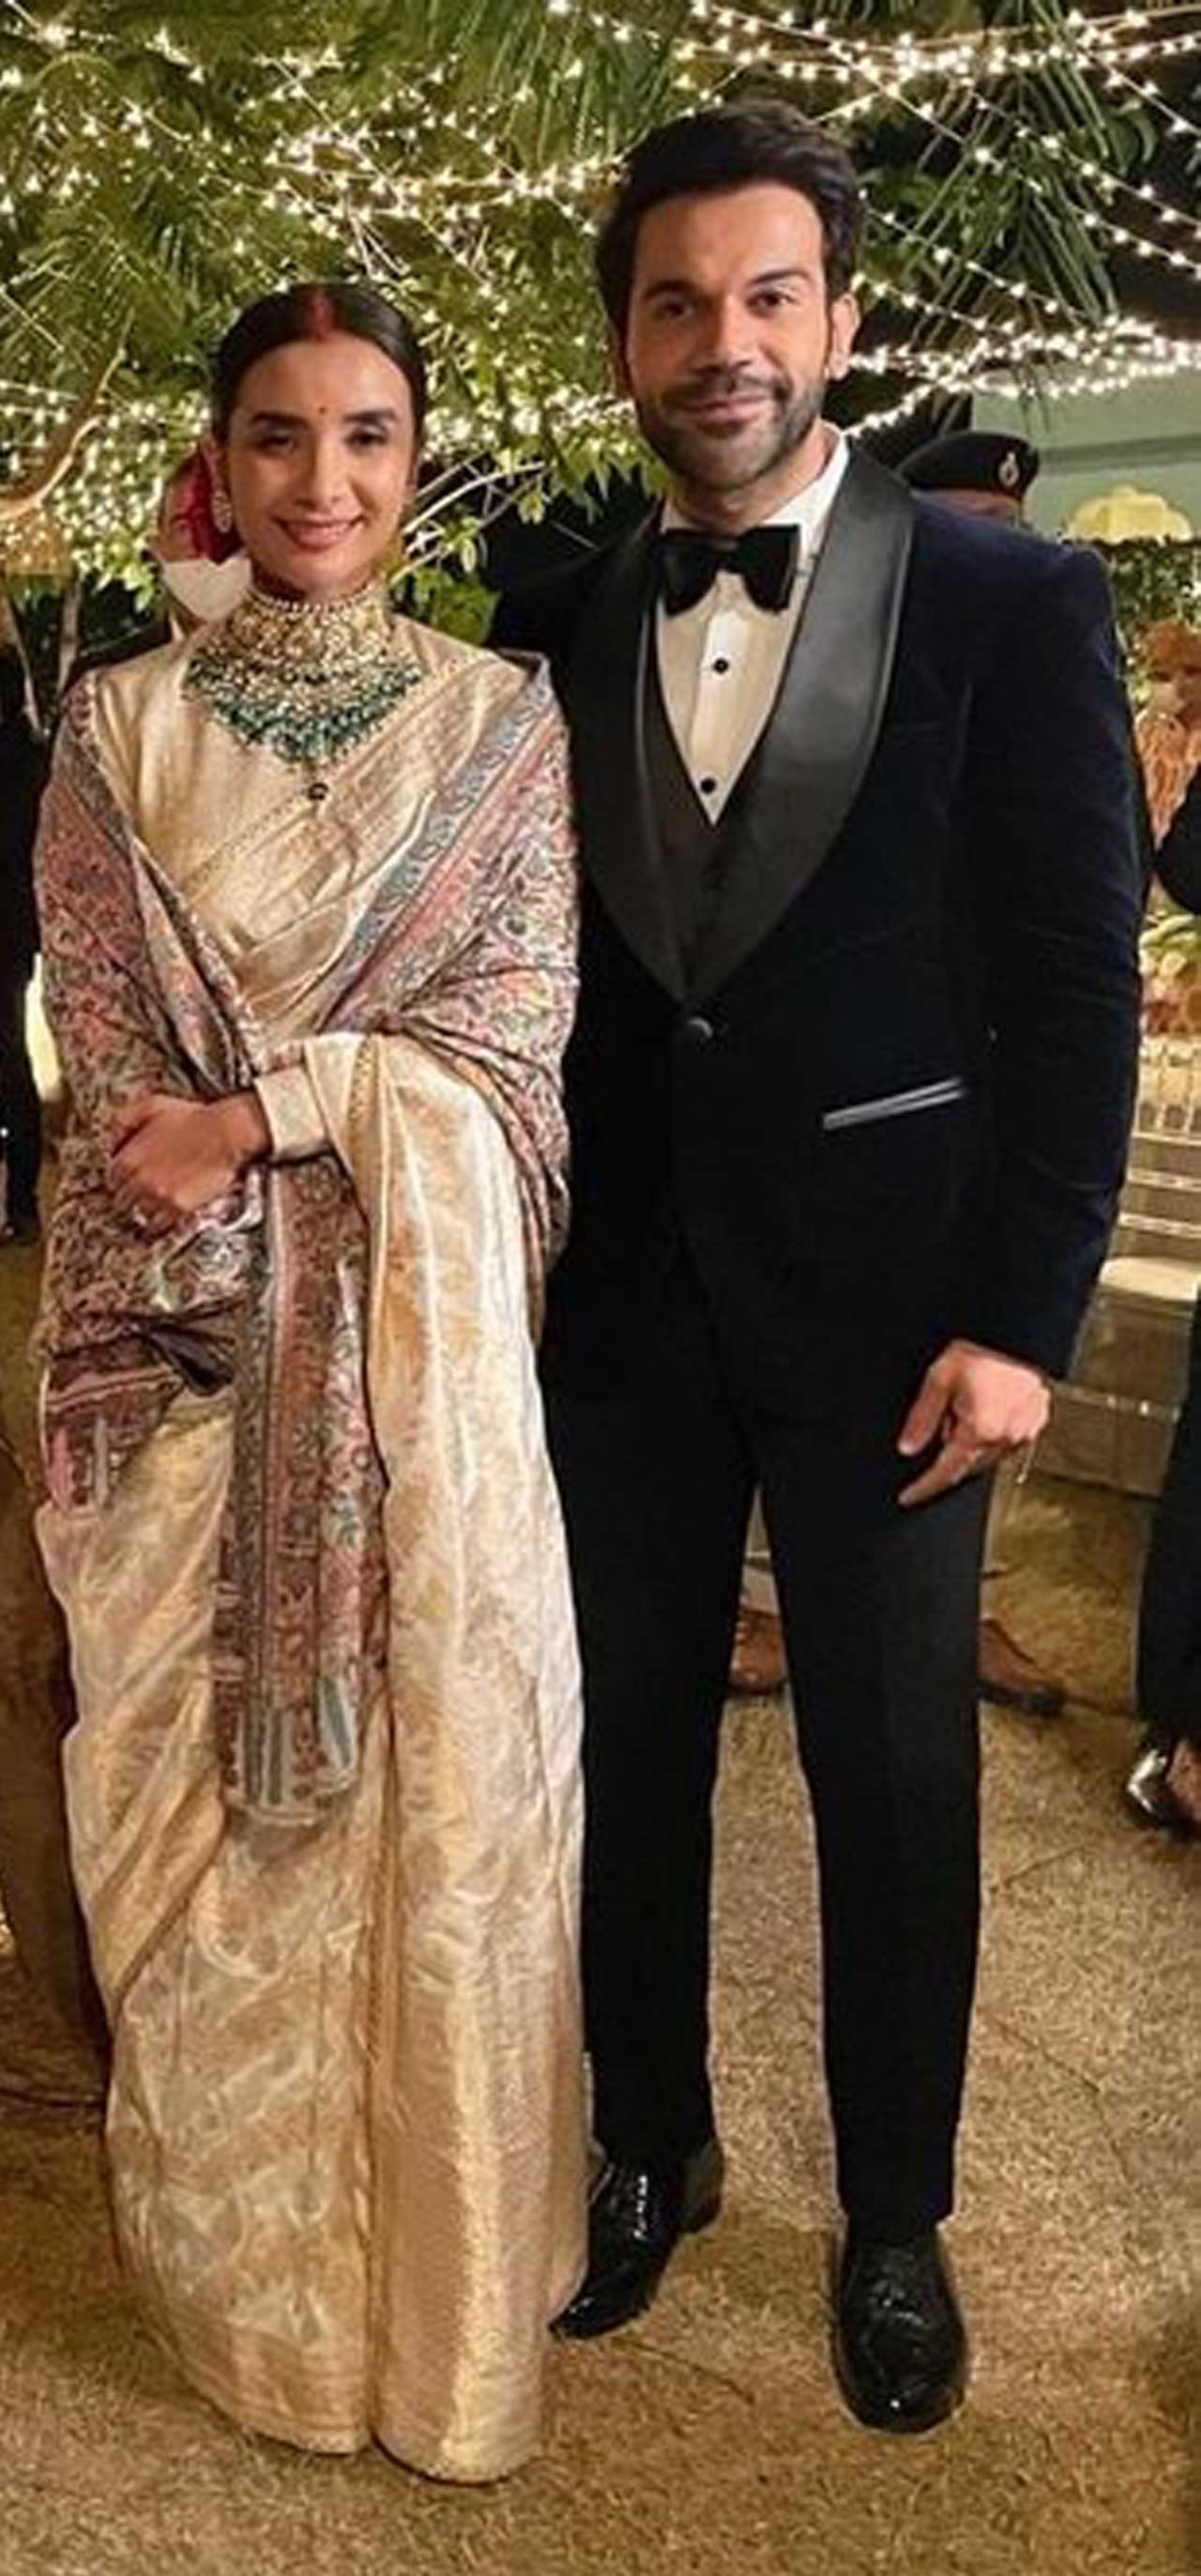 After a beautiful wedding ceremony, the couple hosted a reception that had the who's who from Chandigarh in attendance. Rajkummar Rao wore a black suit and a bow tie, while Patralekhaa looked beautiful in a gold saree. (Pic: @mlkhattar Twitter account)